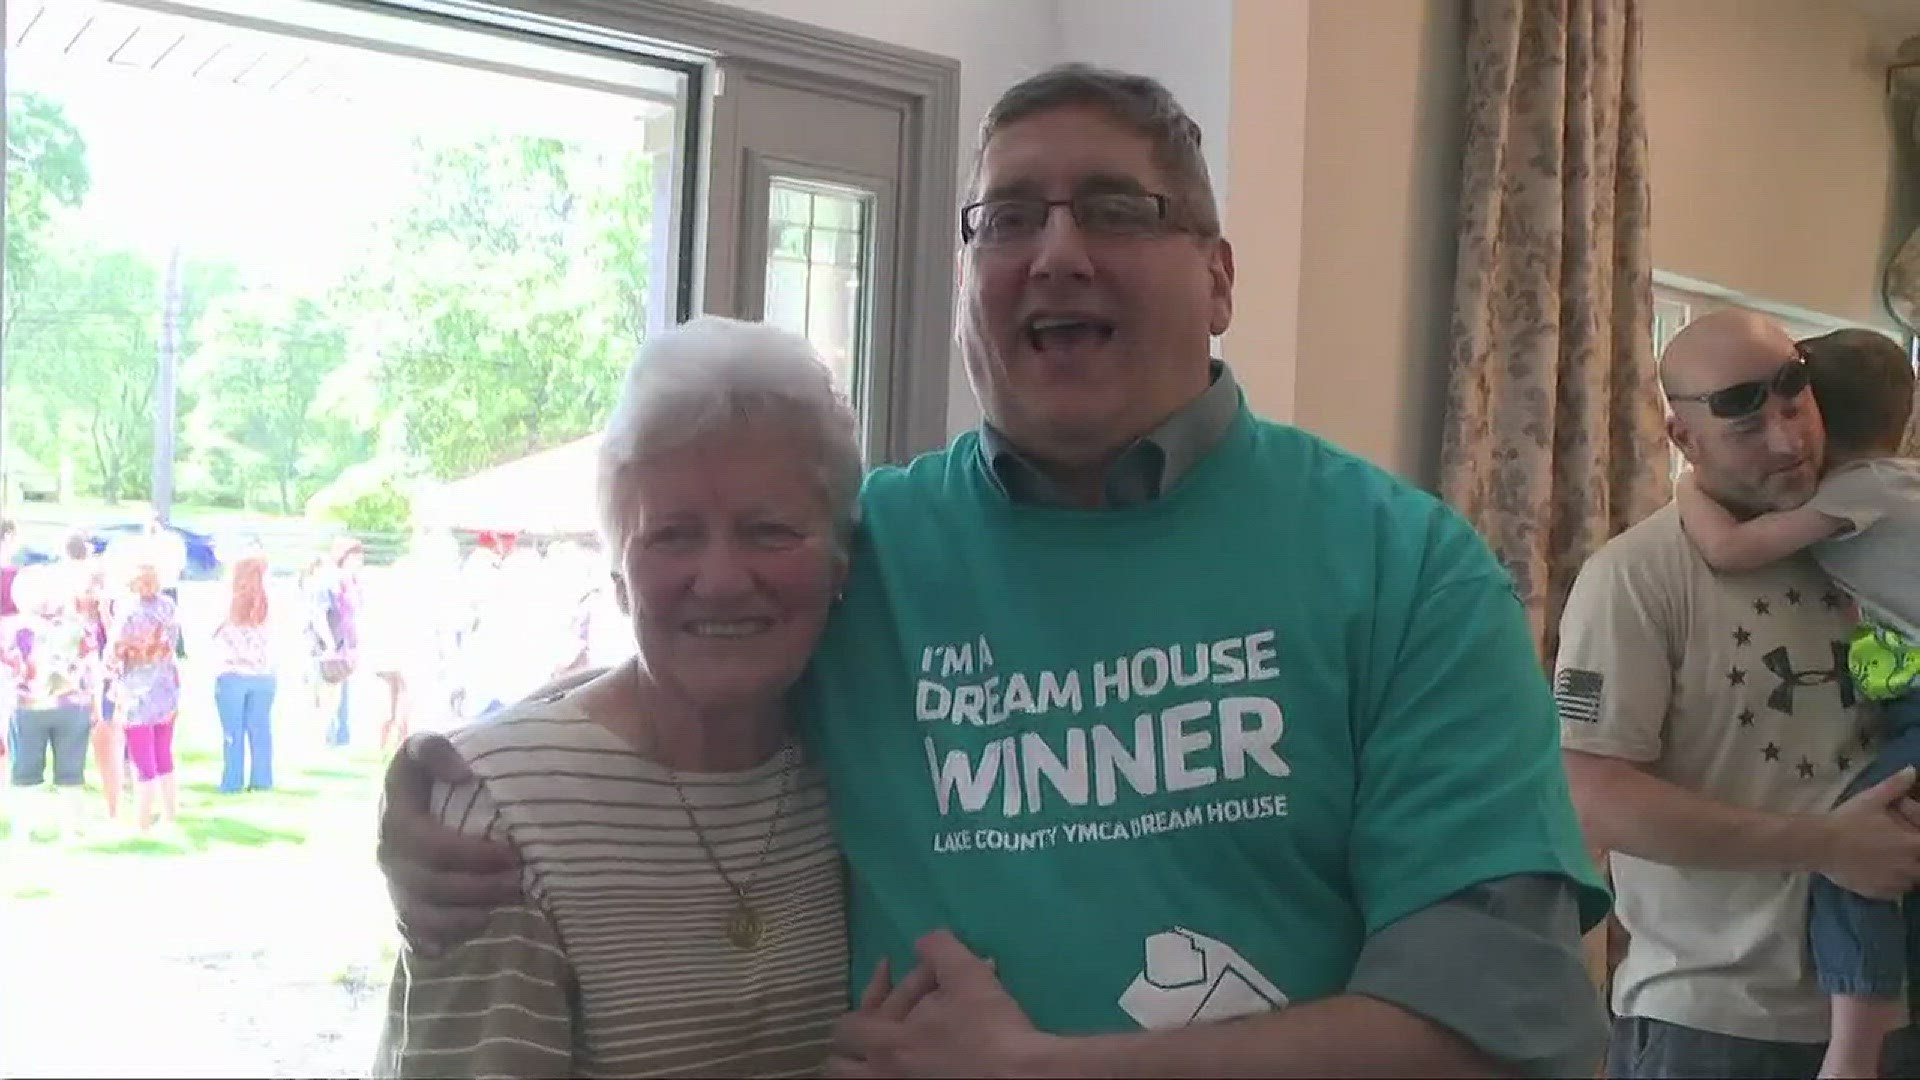 Aug. 13, 2017: Ron Fatica was the lucky winner of the 2017 YMCA Lake County Dream House contest. He has the option to keep the home or take a $250,000 cash prize.